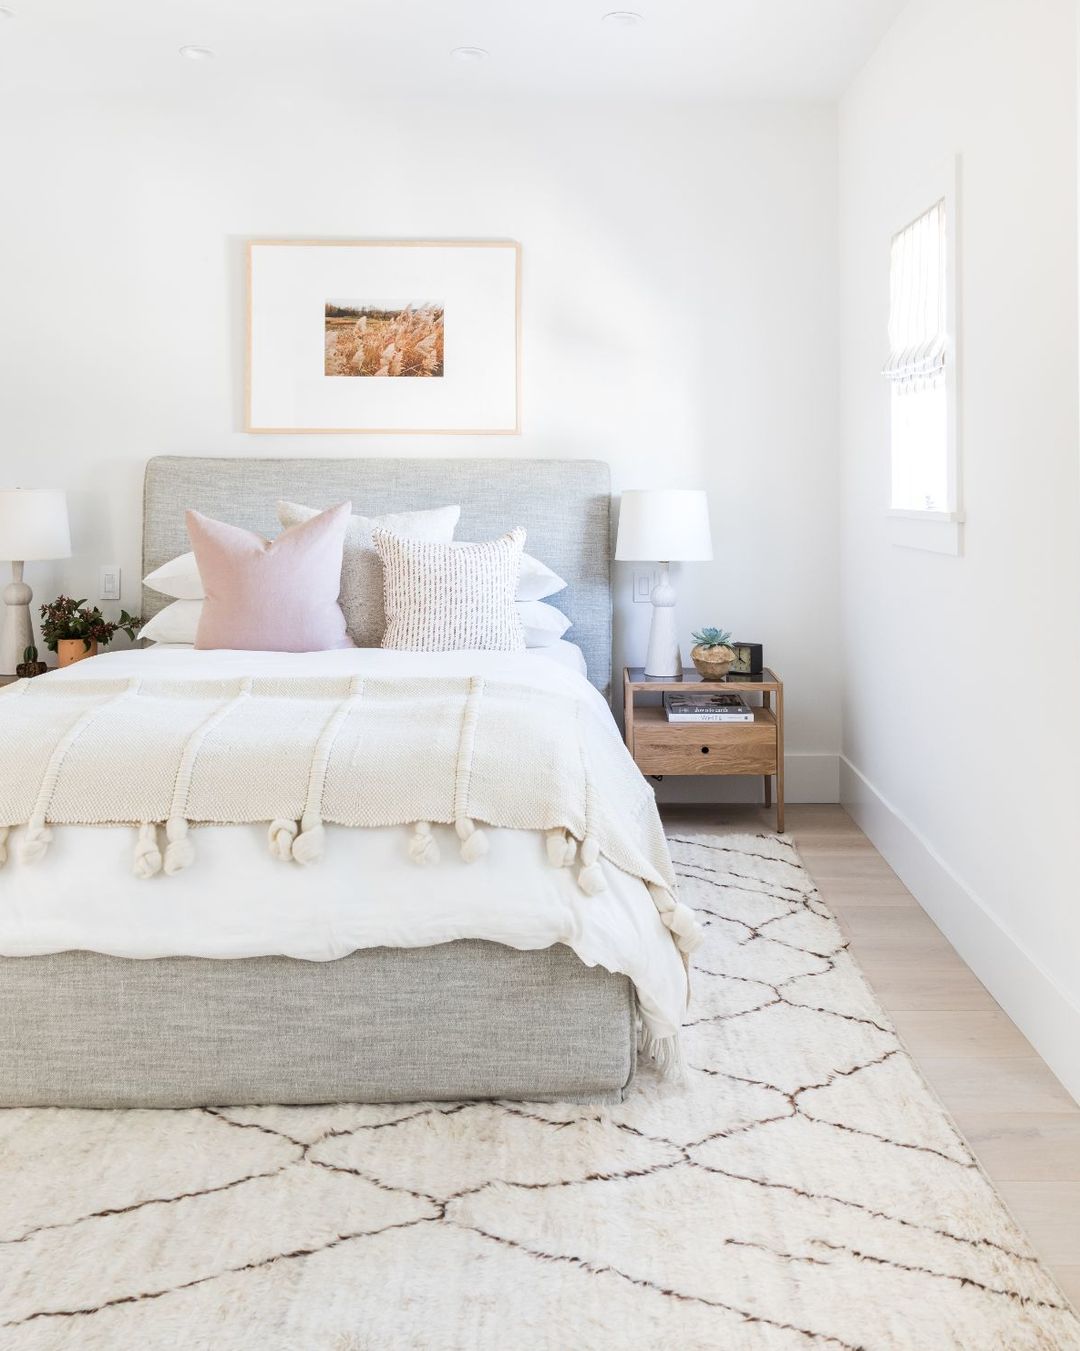 Bedroom with hardwood floors and large area rug. Photo by Instagram User @mindygayerdesign